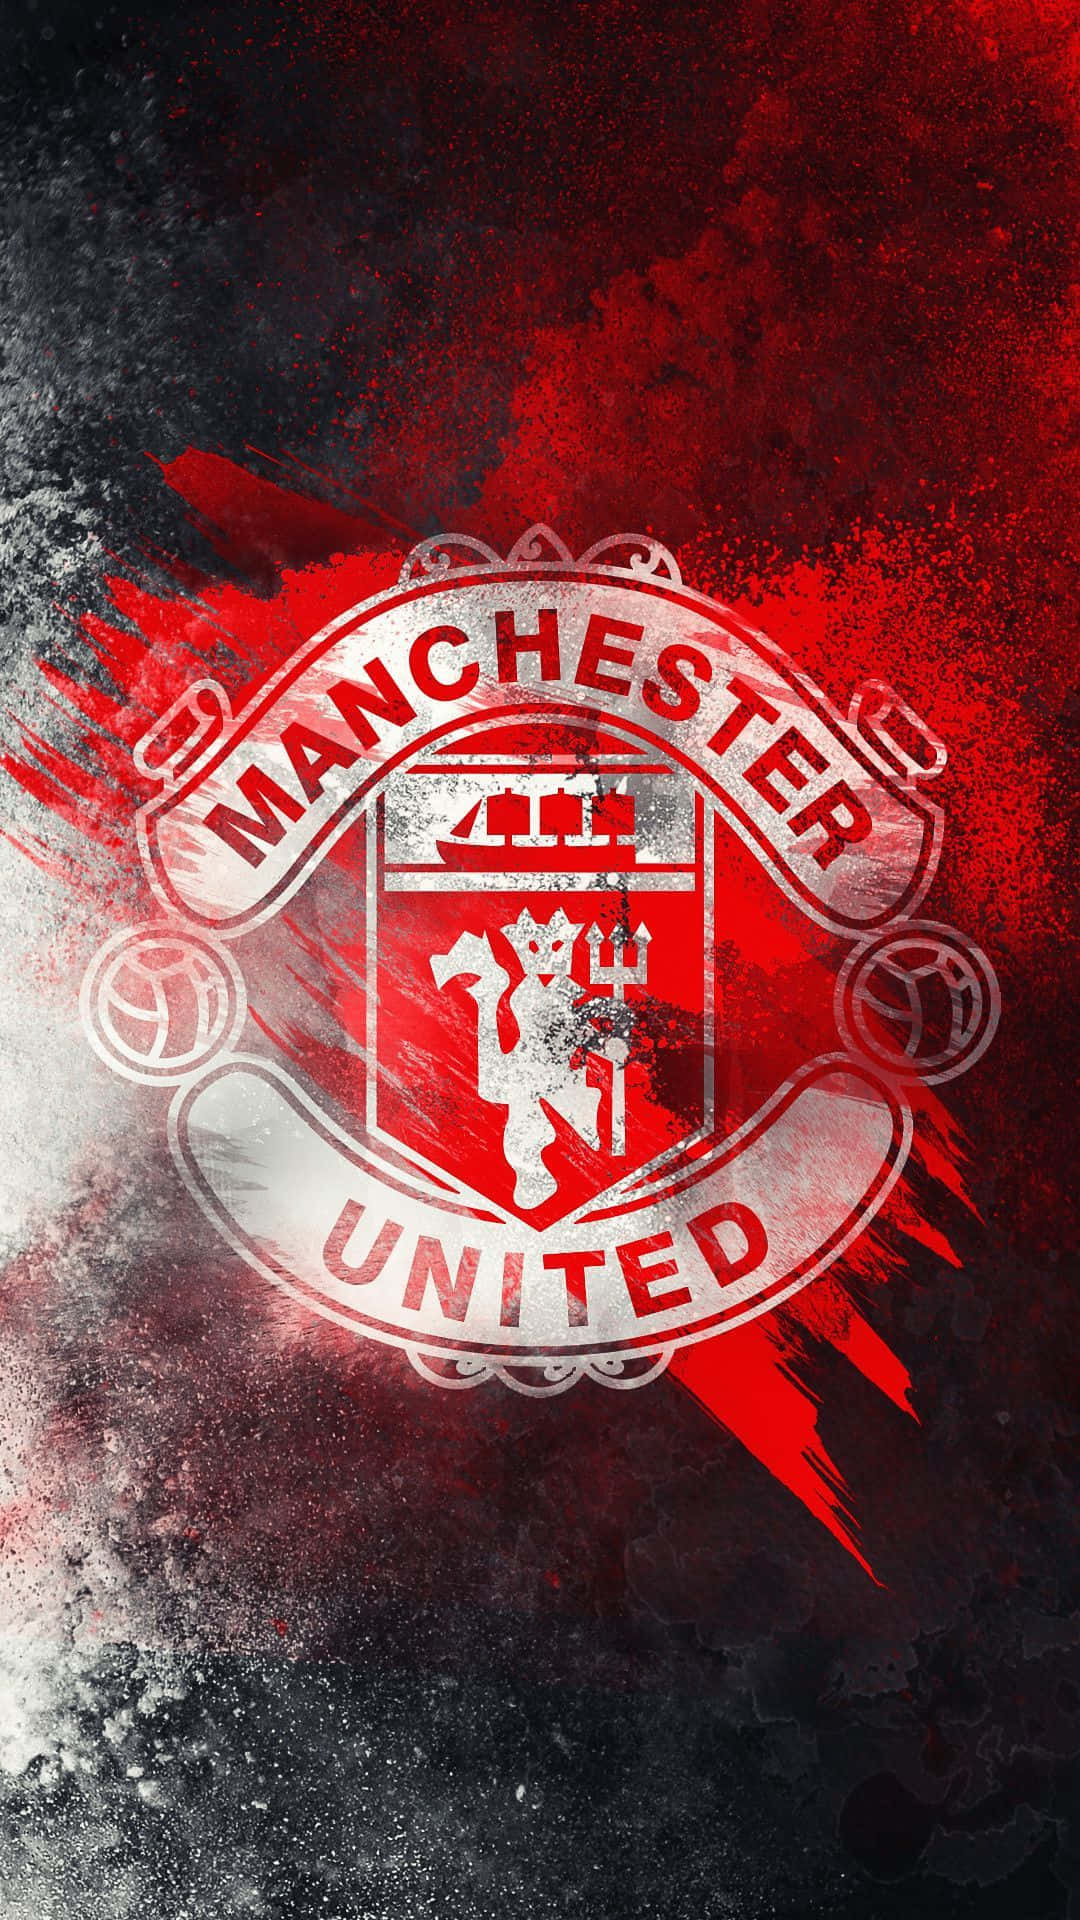 Show your Manchester United pride with this exclusive smartphone! Wallpaper